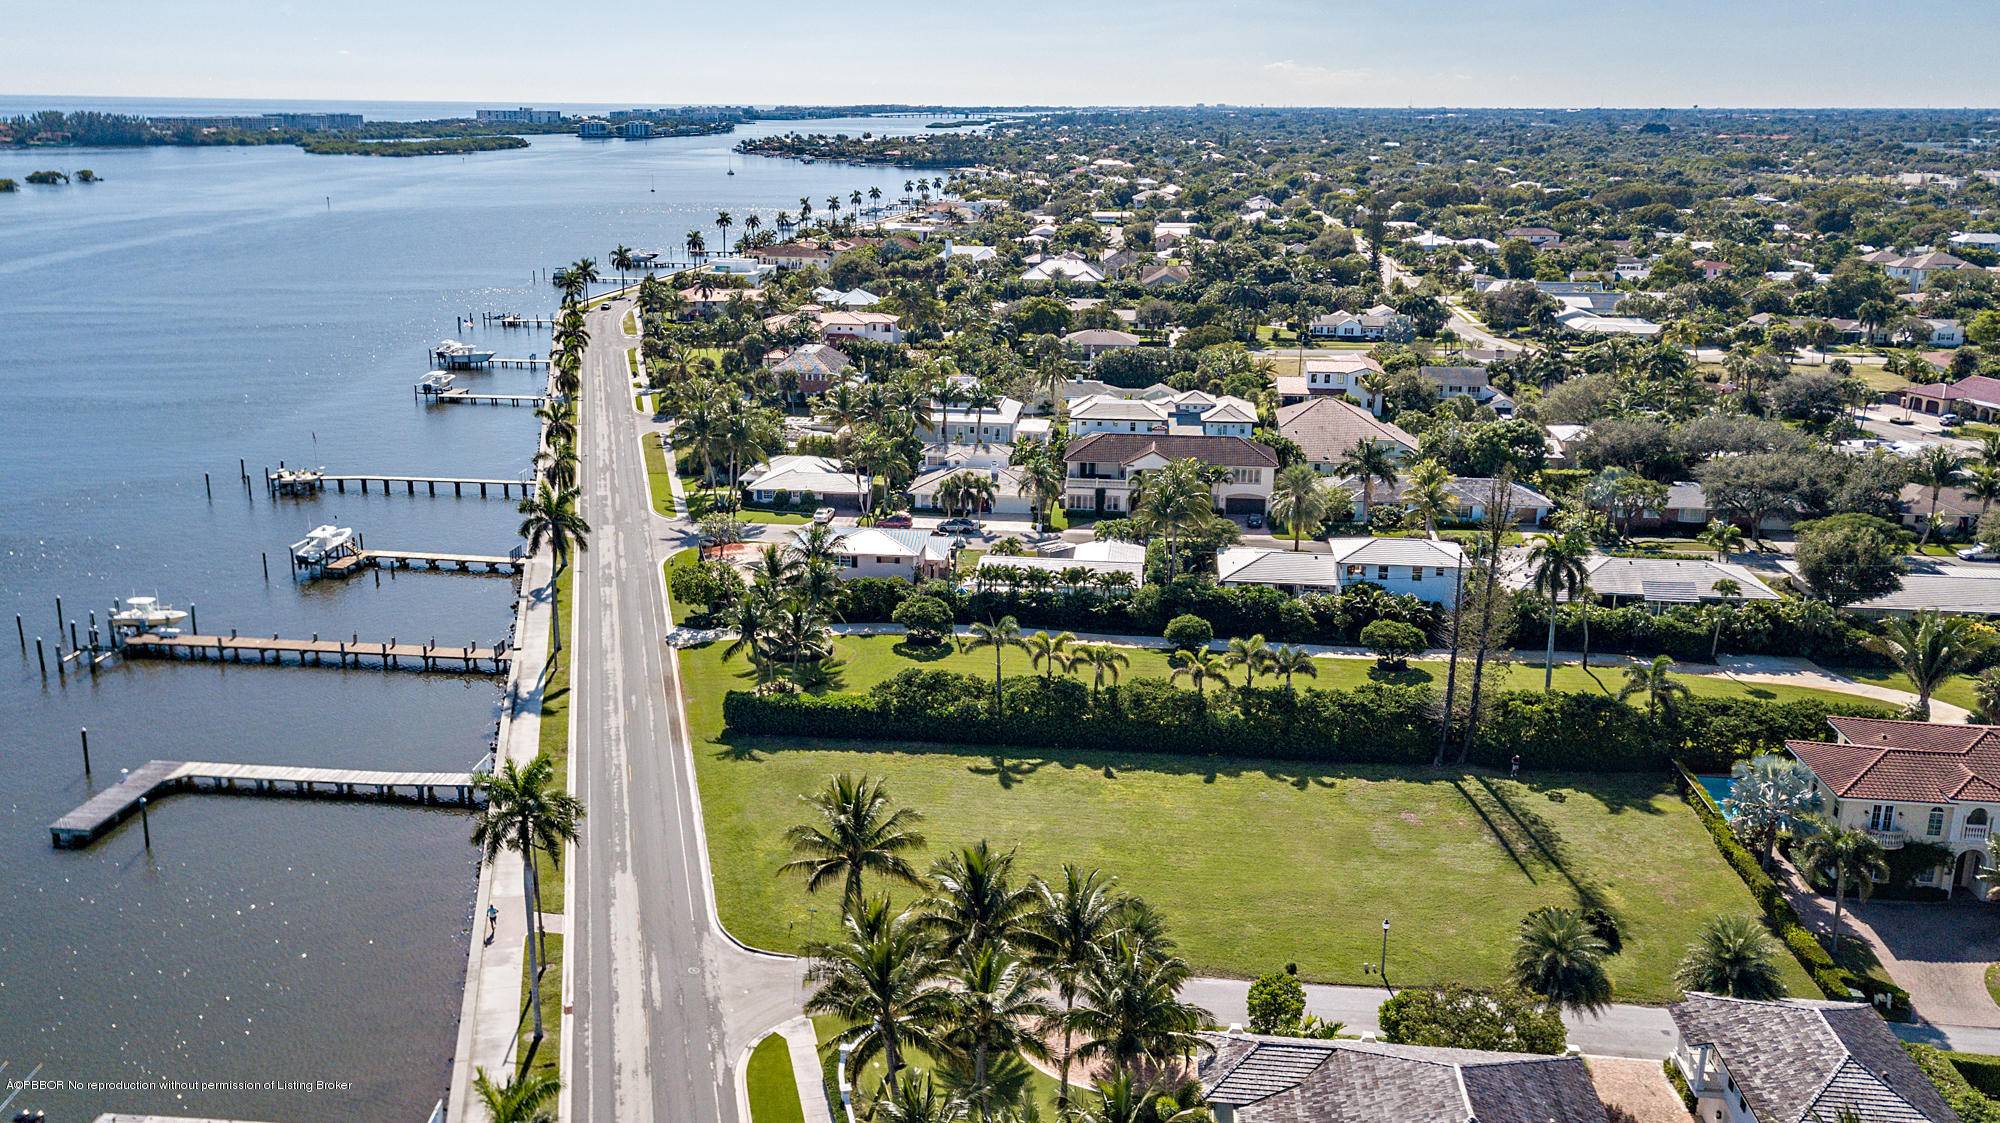 Situated on over 1 2 acre, this stunning waterfront property is one of the largest available, south of Southern Blvd and north of Forest Hill.